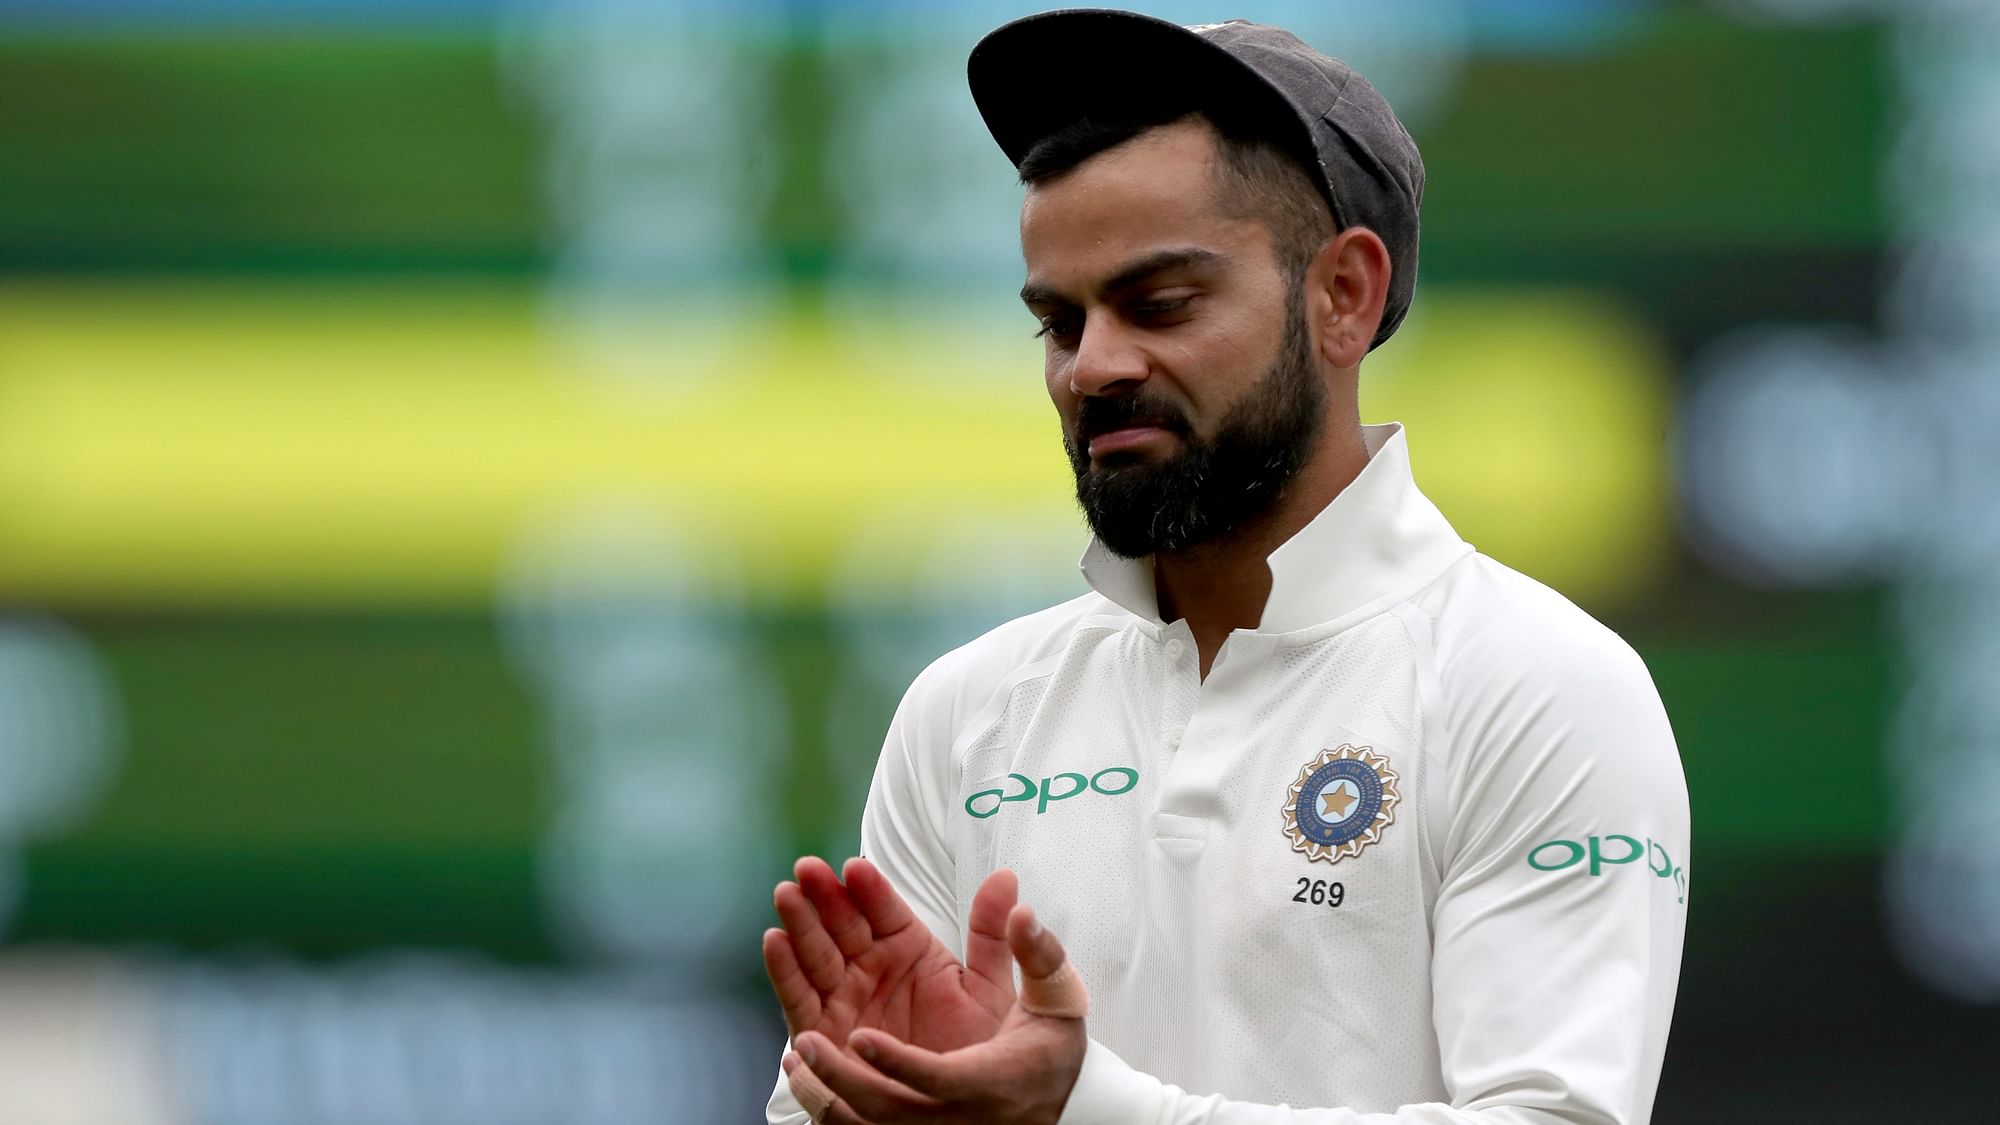 Virat Kohli led the way as Indian cricketers backed Prime Minister Narendra Modi’s decision to declare a 21-day lockdown.